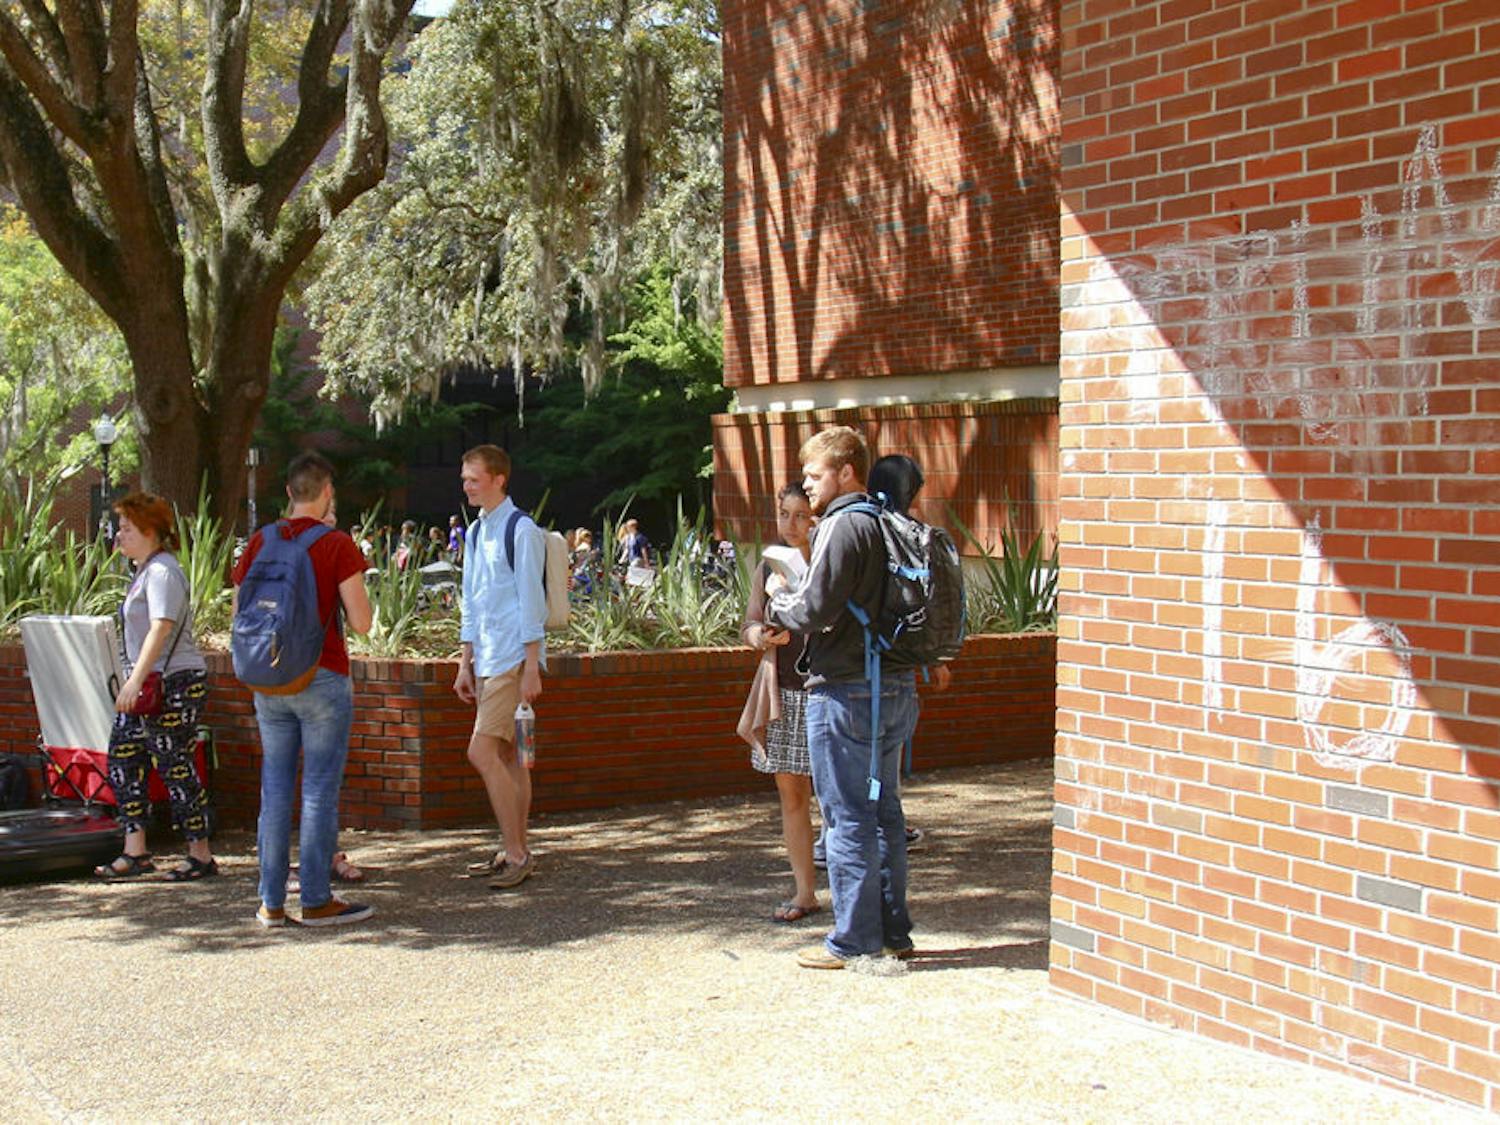 Students pass by a “Trump 16” sign chalked into the wall of Turlington Plaza on Monday. The sign was a part of a nationwide April Fool’s contest organized by entertainment website and forum Old Row, which asked students to chalk pro-Trump messages across their campuses.